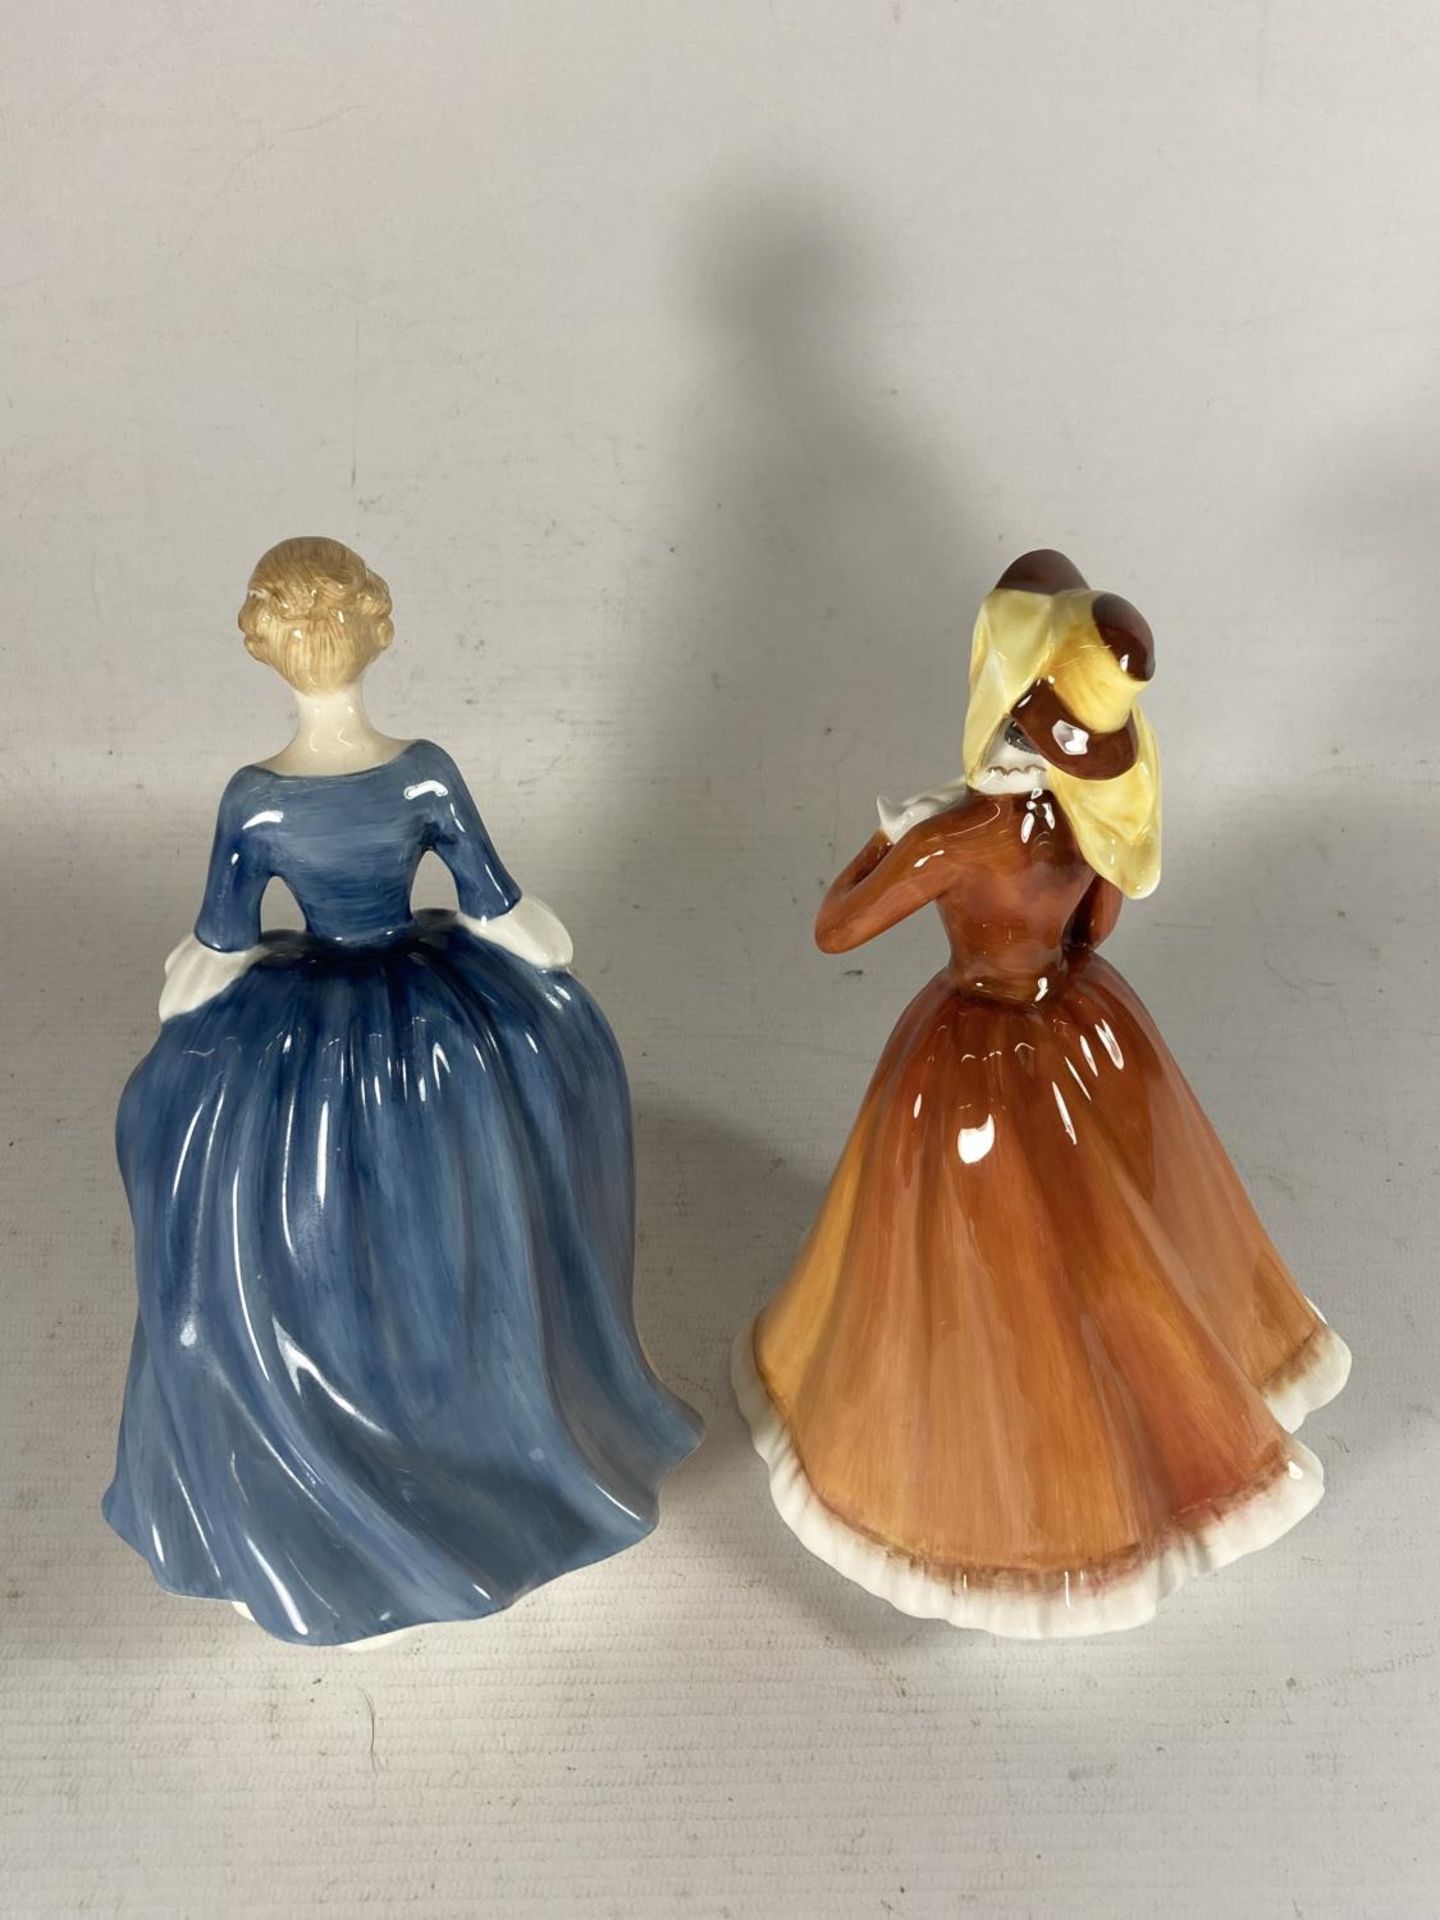 TWO ROYAL DOULTON FIGURES ALISON (SECOND) AND JULIA - Image 2 of 4